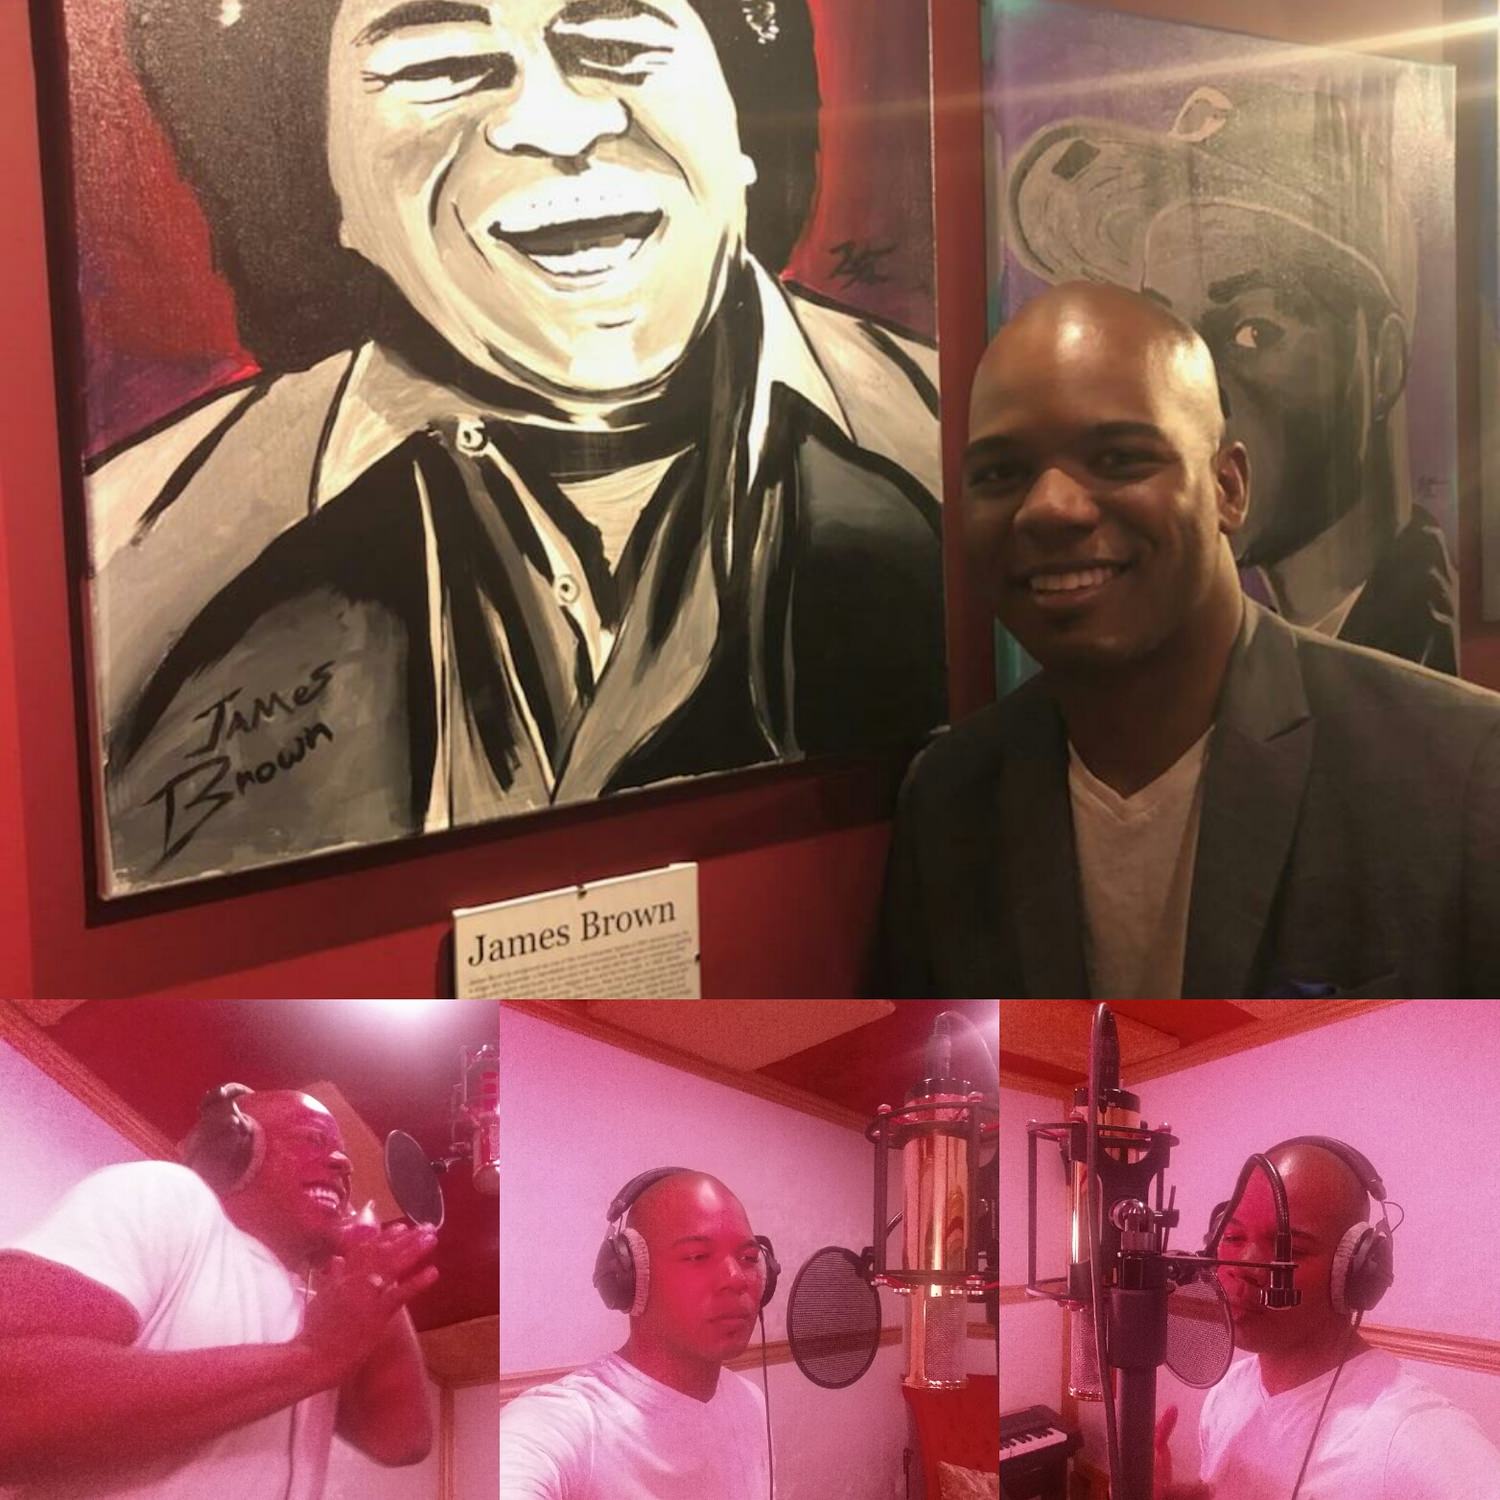 Dedrick Weathersby pose's with a James Brown pivcture in the studio where it all happened.